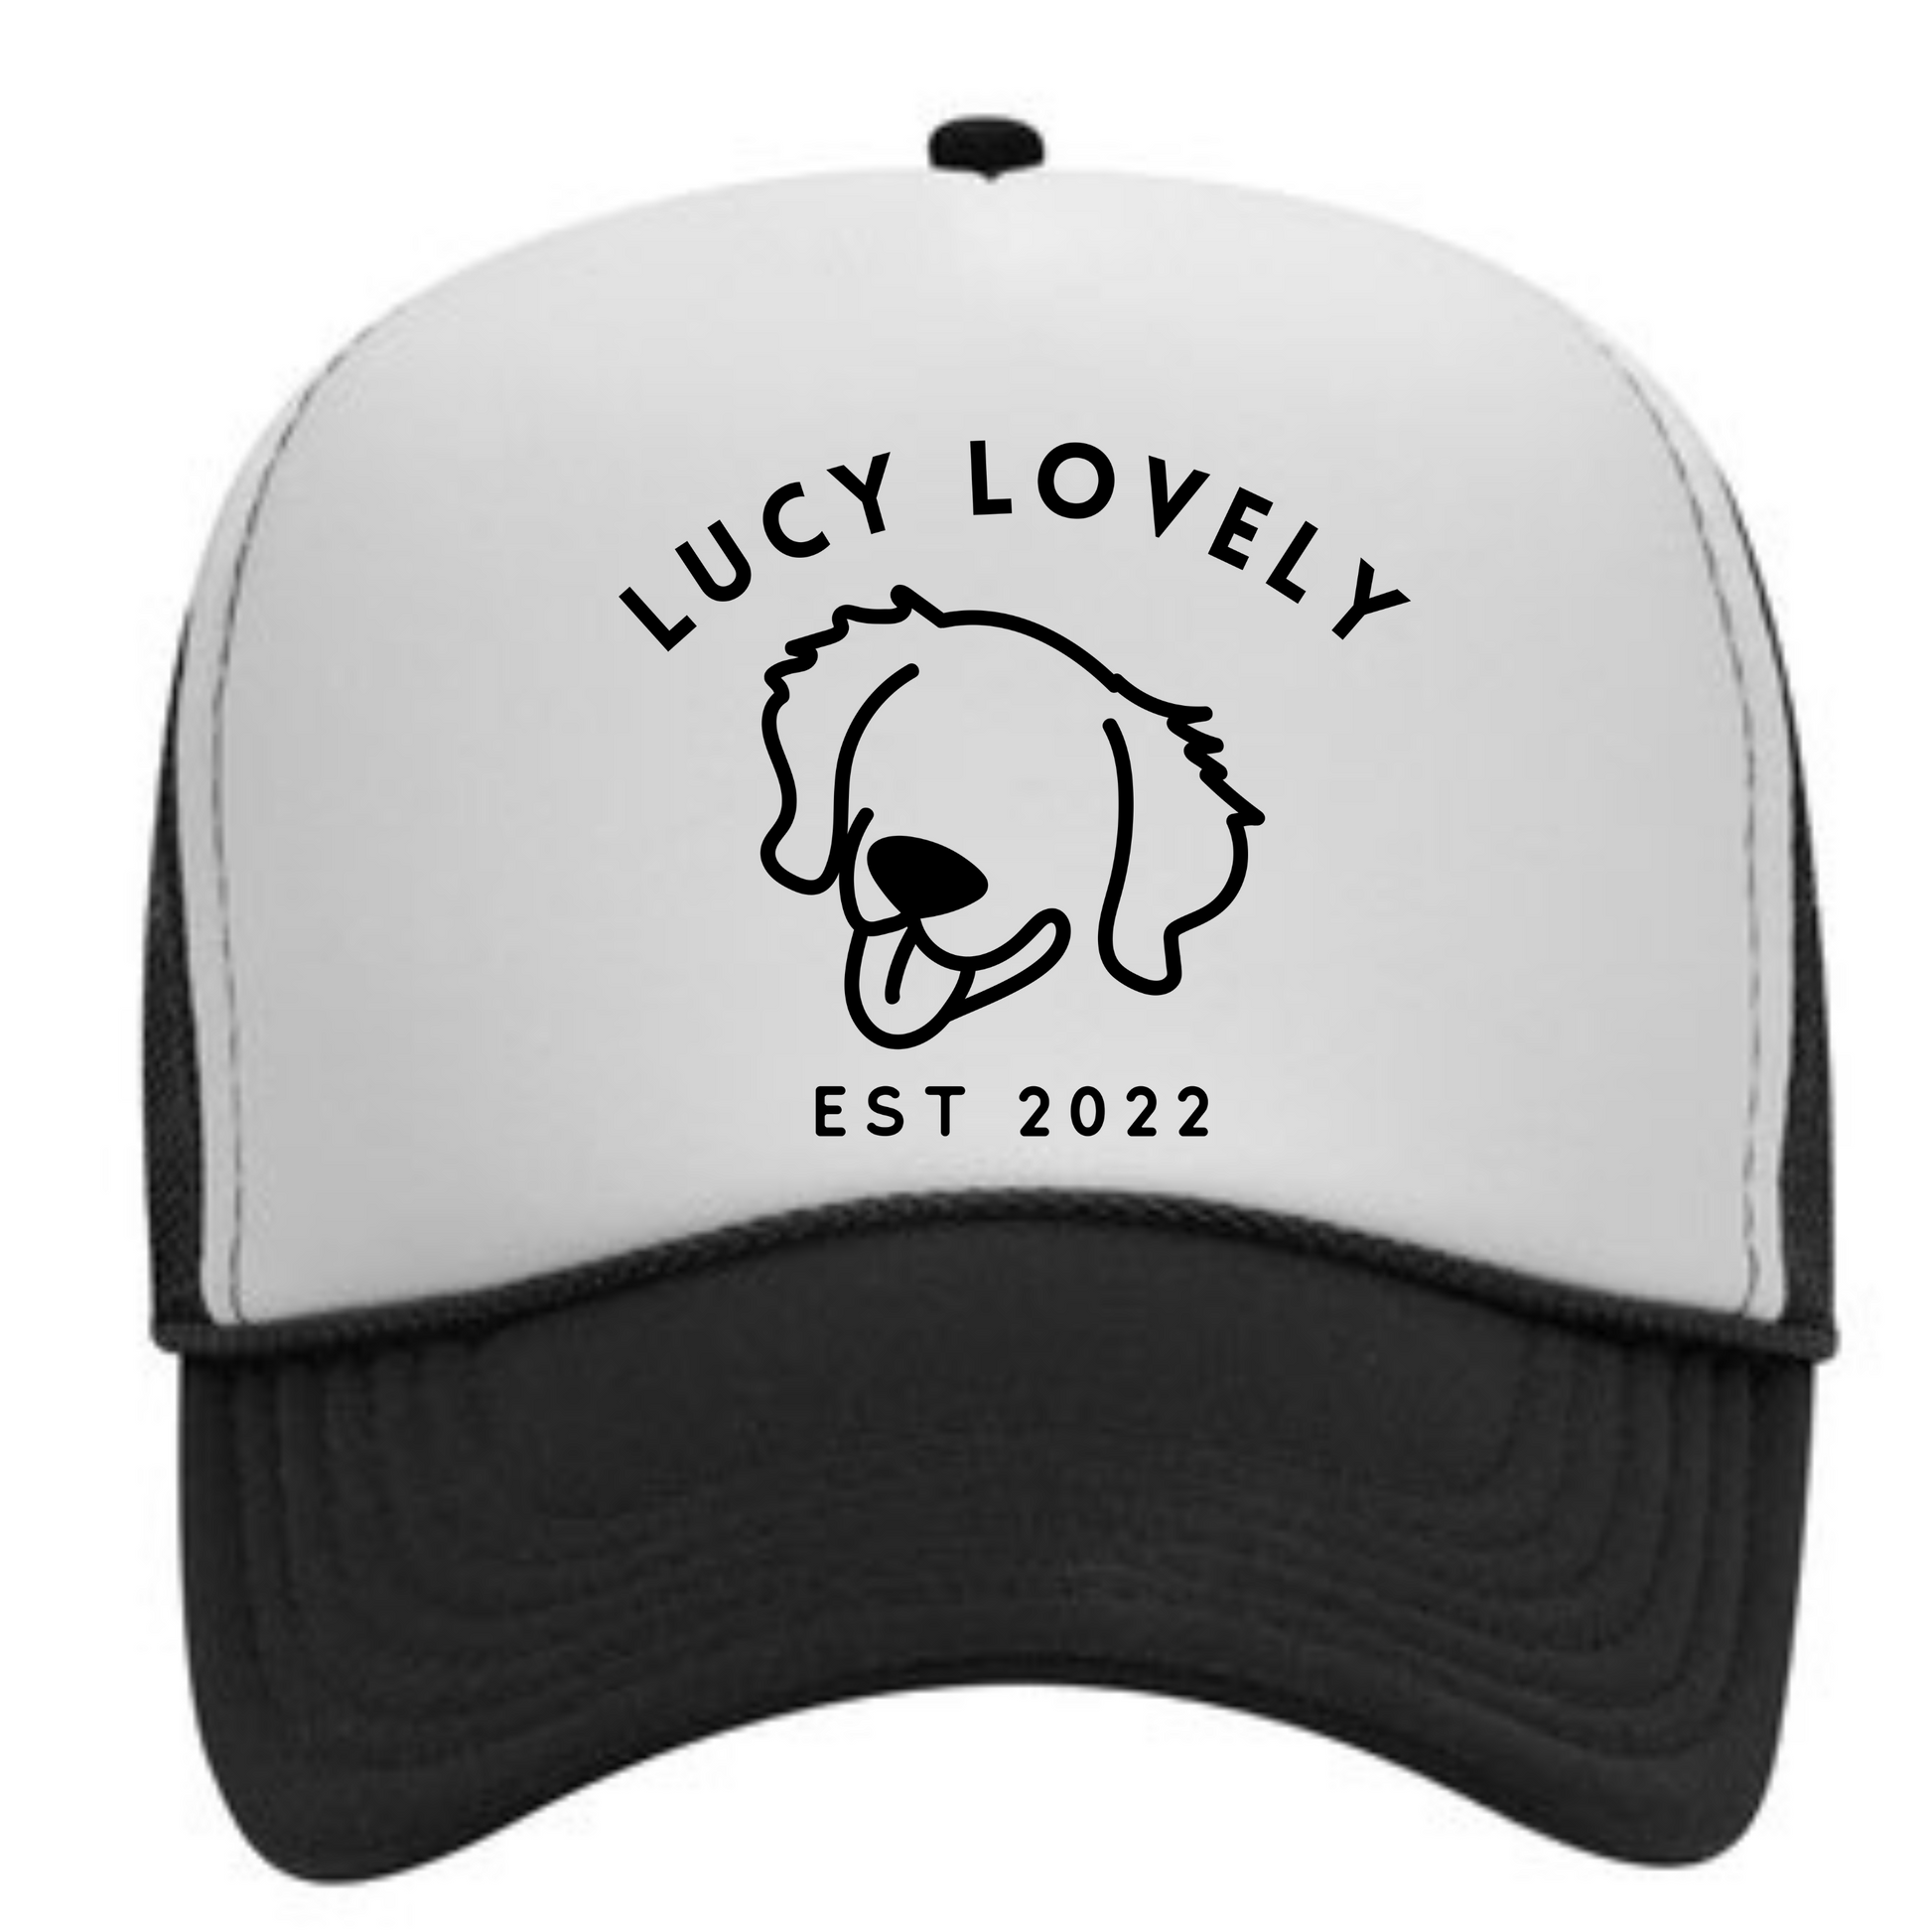 Pick your dog breed foam trucker hat - dog mom hat, dog person hat